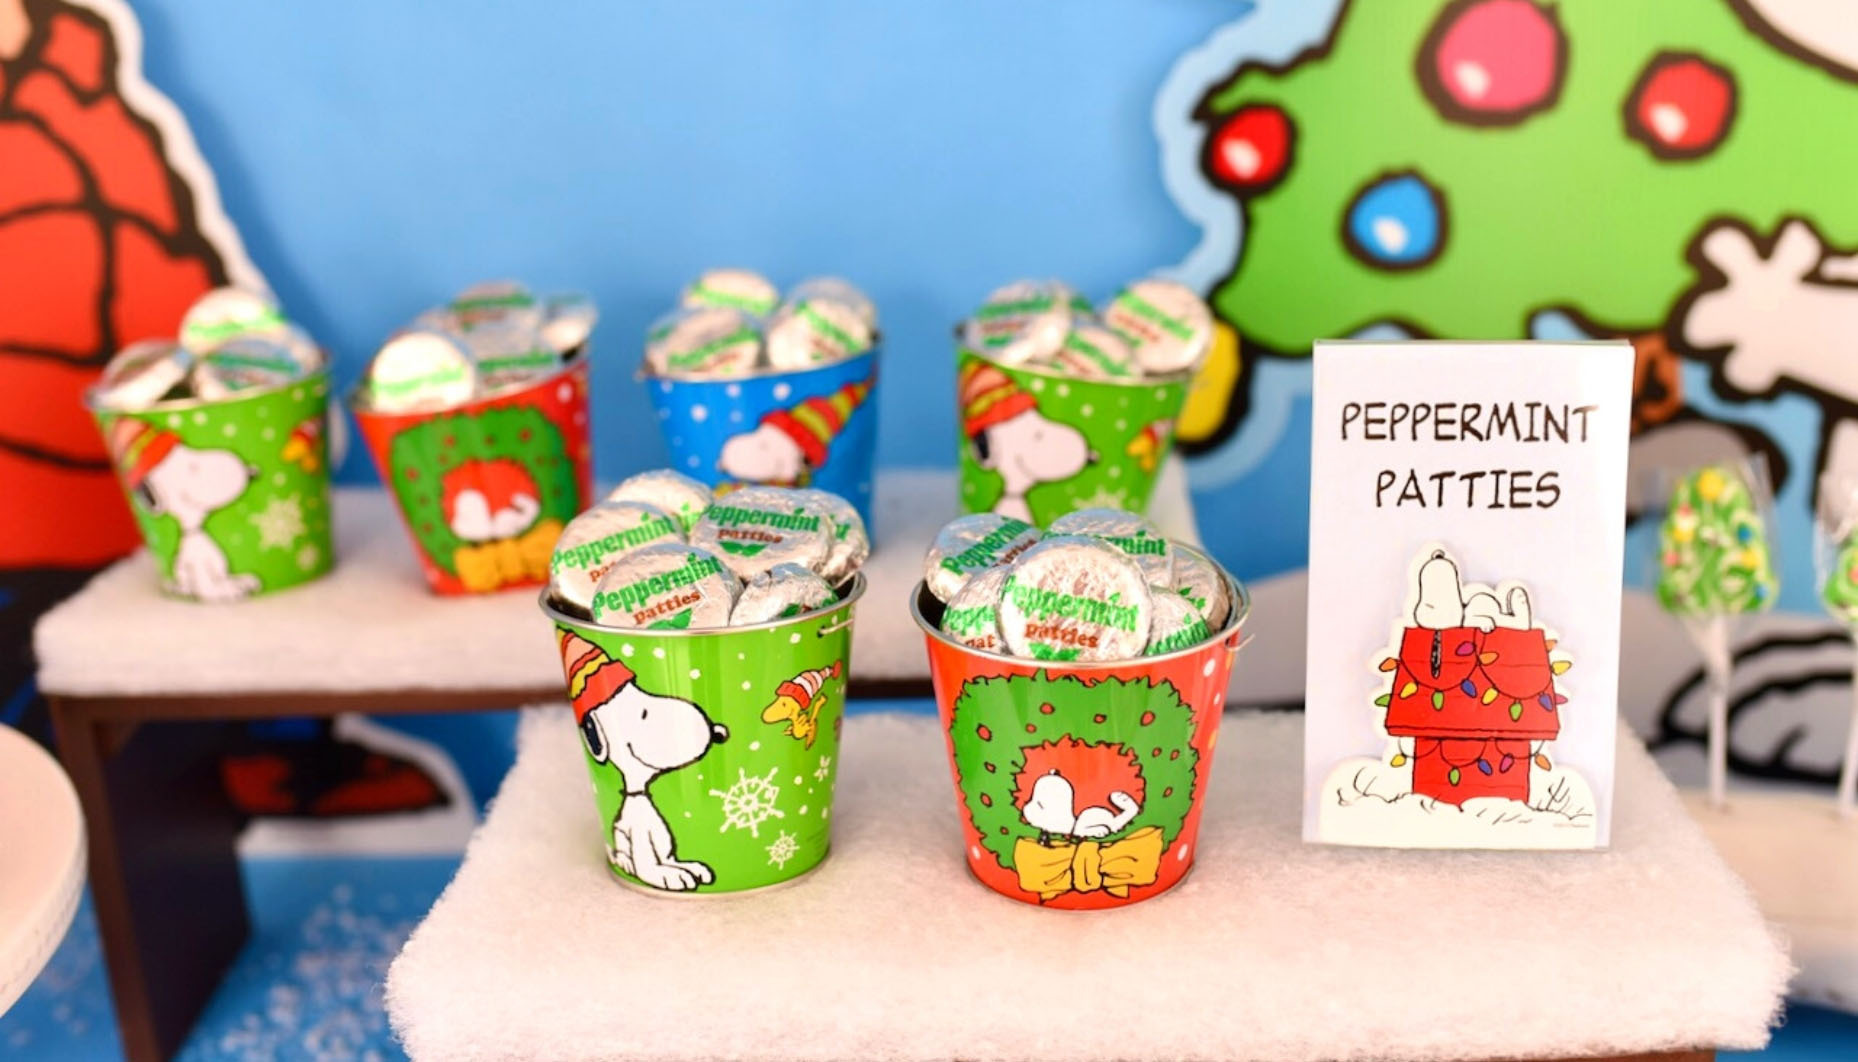 Download A Charlie Brown Christmas Party Fun365 Yellowimages Mockups